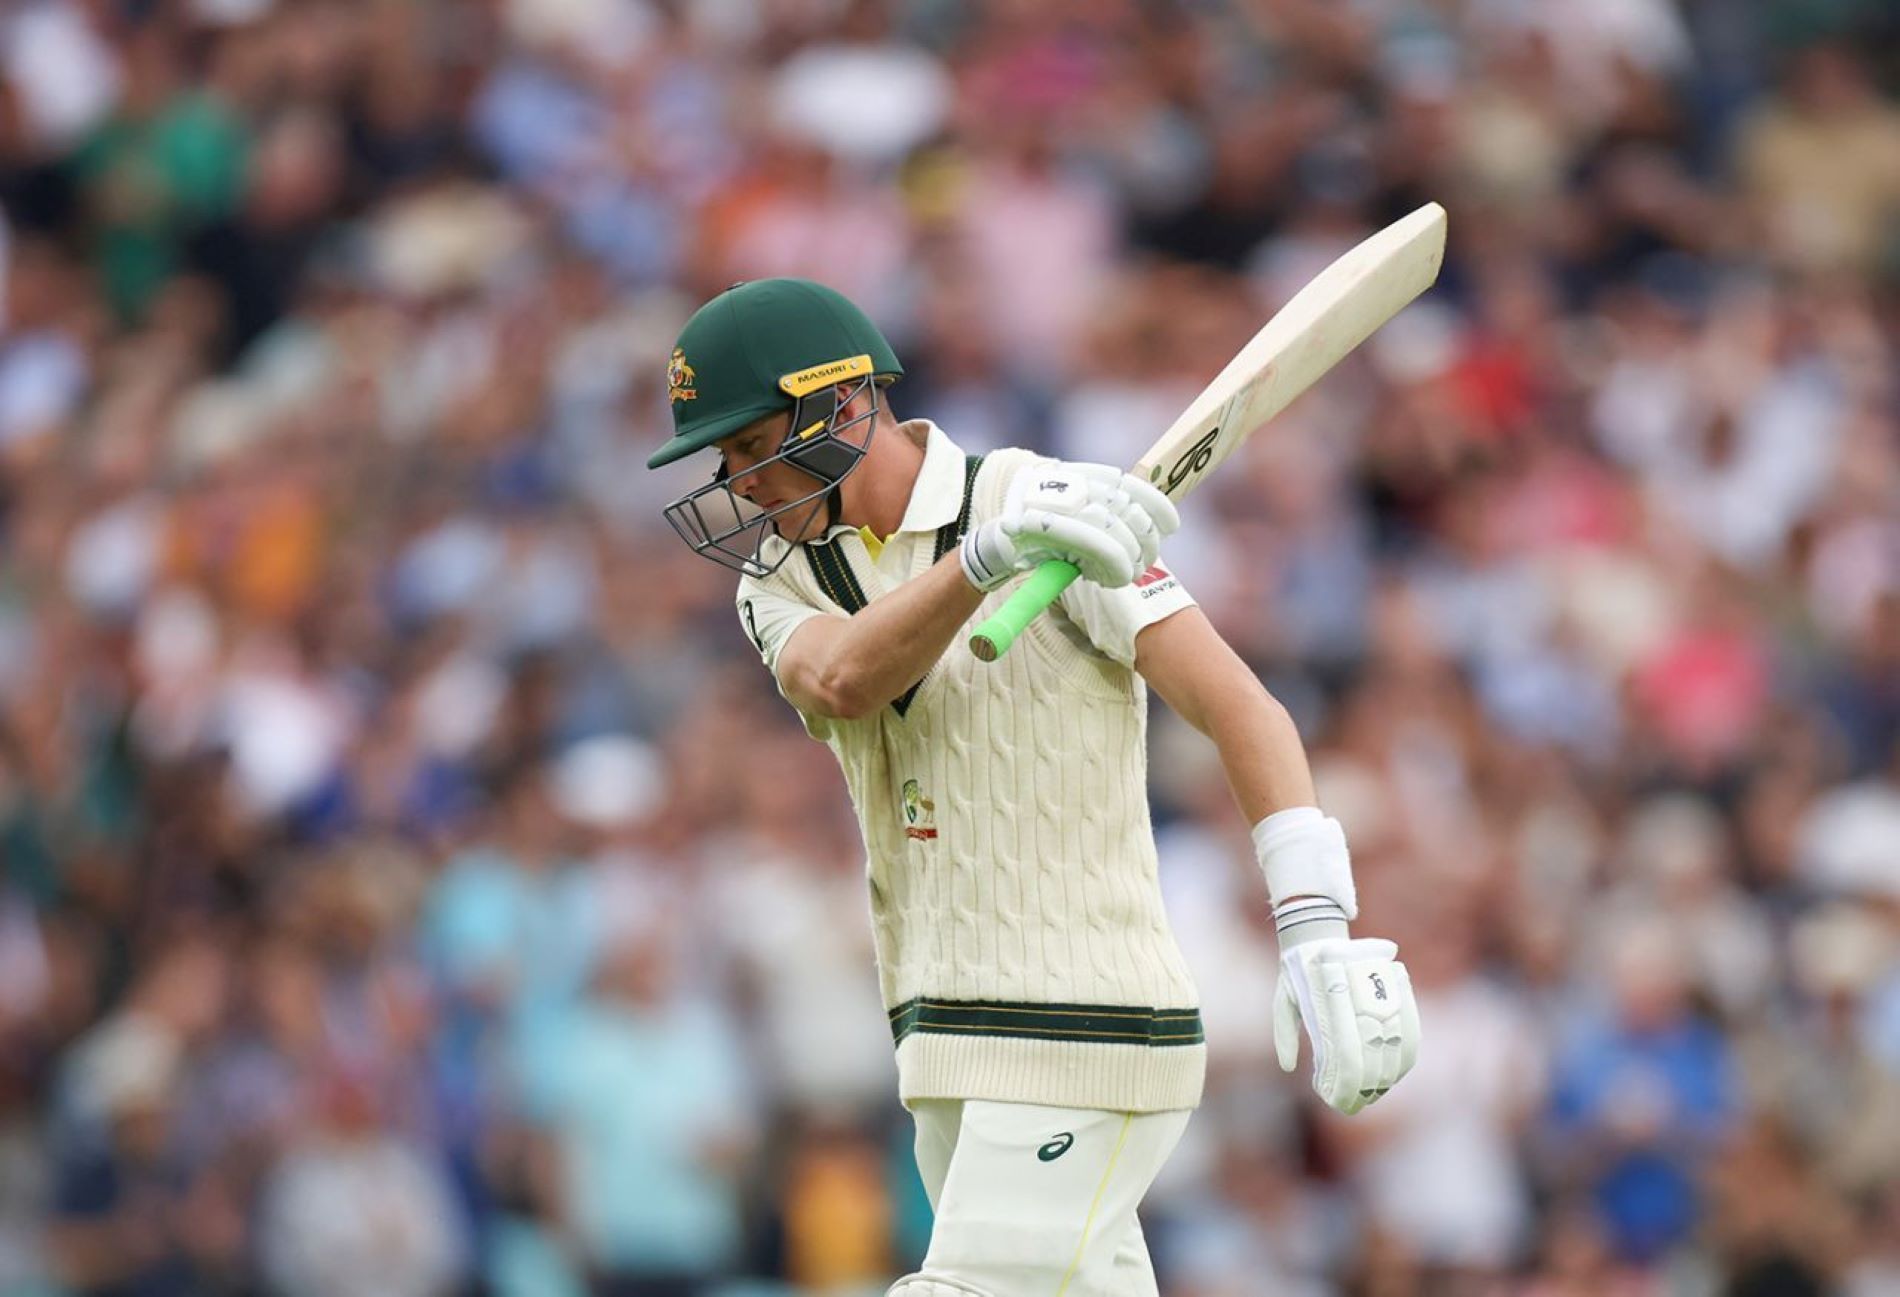 Labuschagne played an uncharacteristically painful knock in the first innings